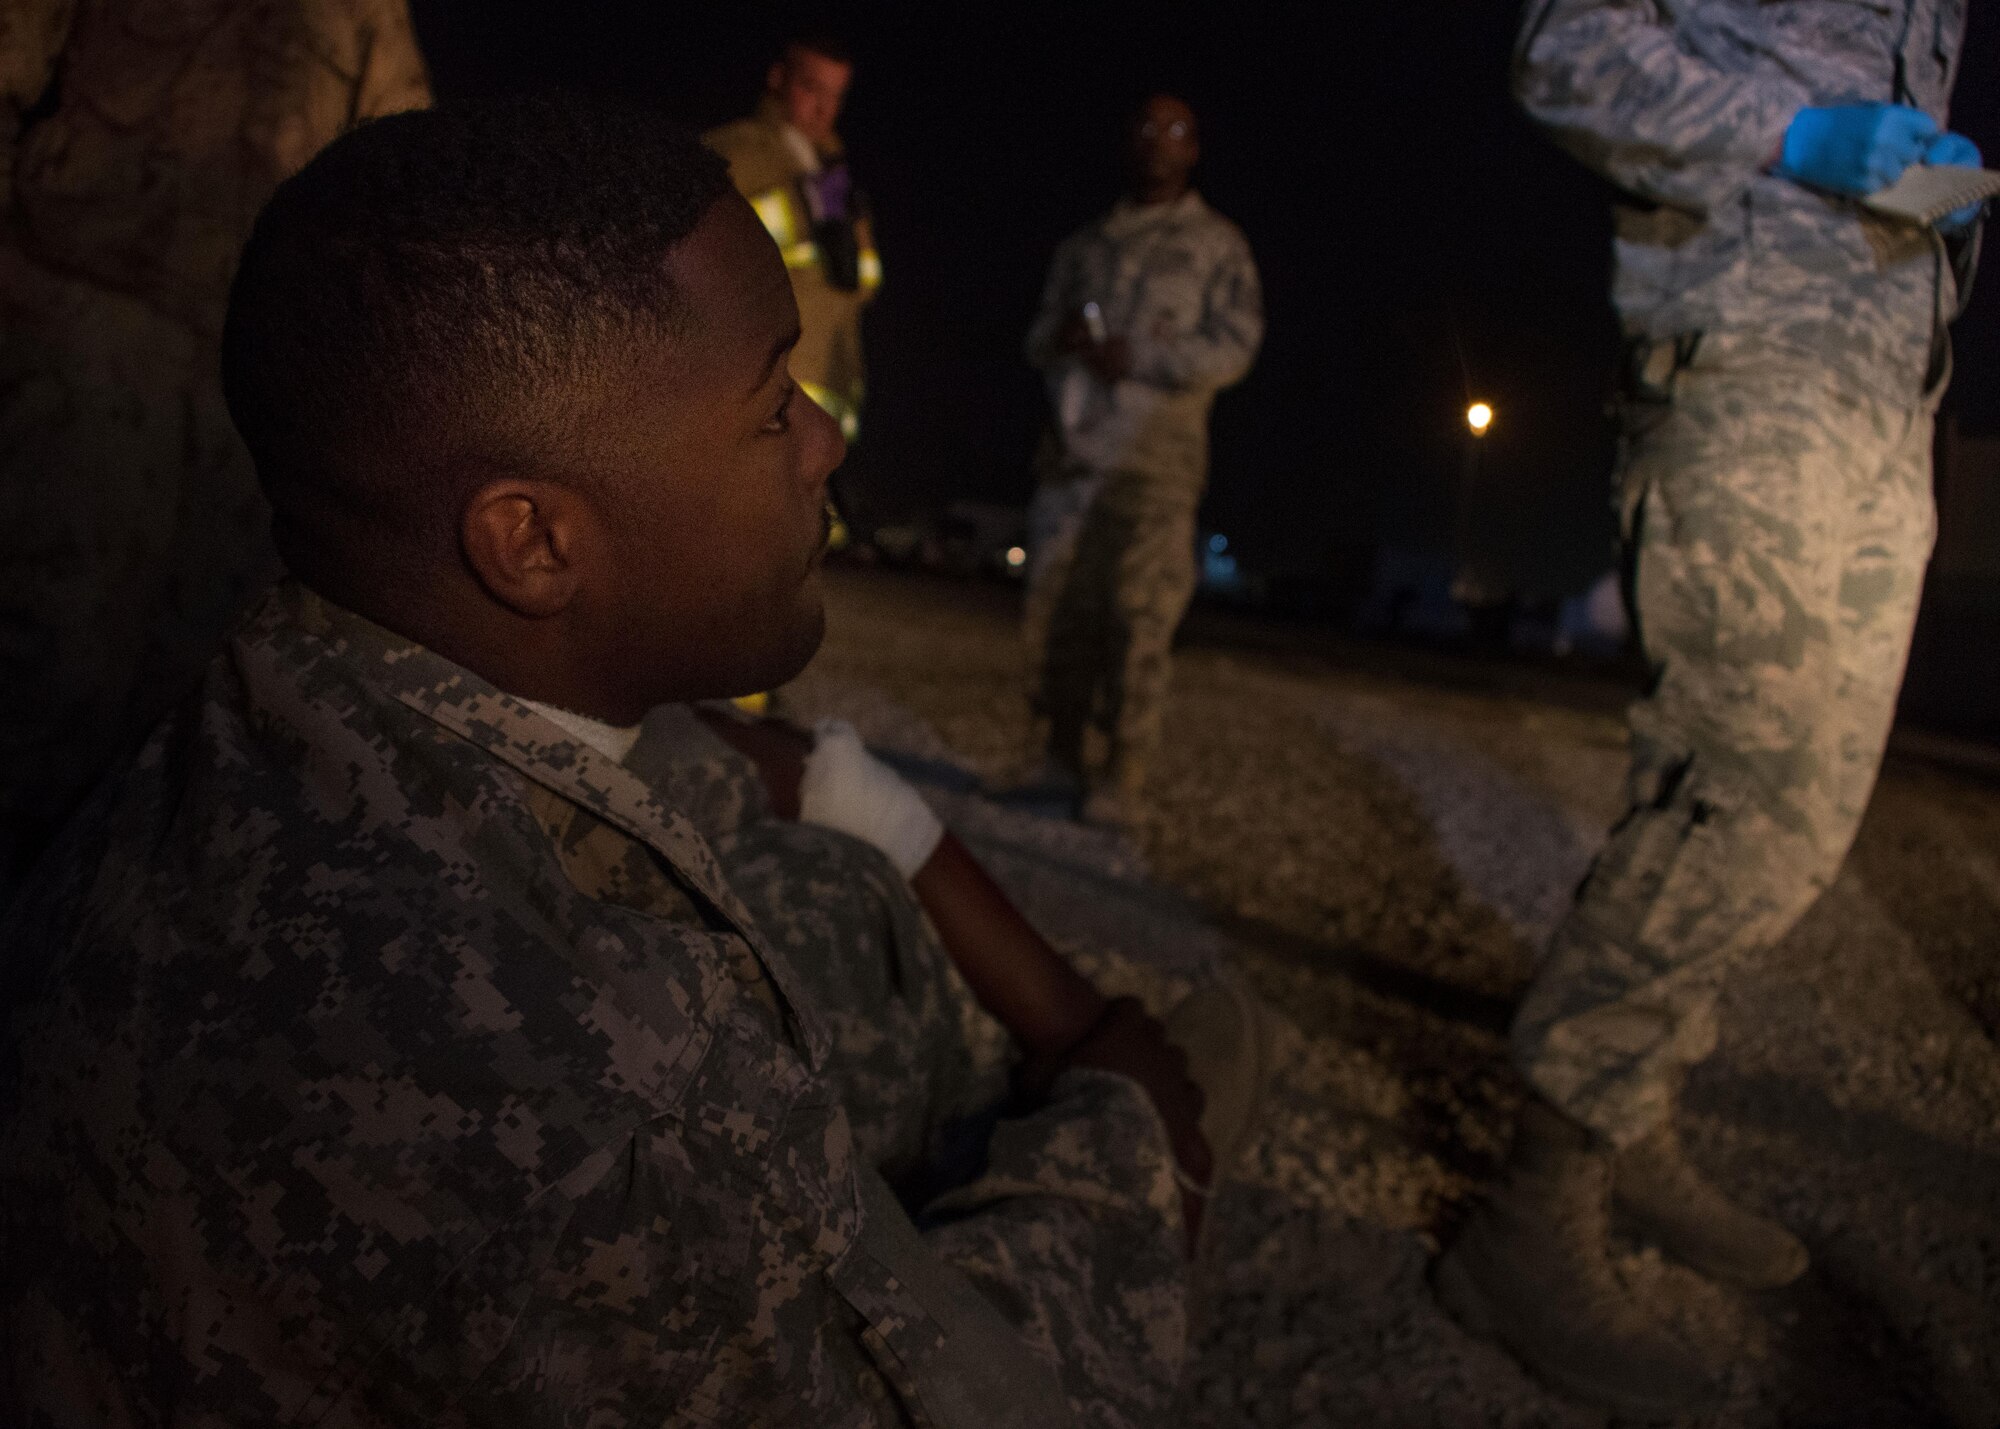 Senior Airman Kemien Brown, a 386th Expeditionary Civil Engineer Squadron firefighter, simulates waiting for medical transport during a drill at an undisclosed location in Southwest Asia March 10, 2017. Brown’s simulated injuries included minor cuts to his neck and arm, which were treated by firefighters and medics on the scene. (U.S. Air Force photo/Senior Airman Andrew Park)